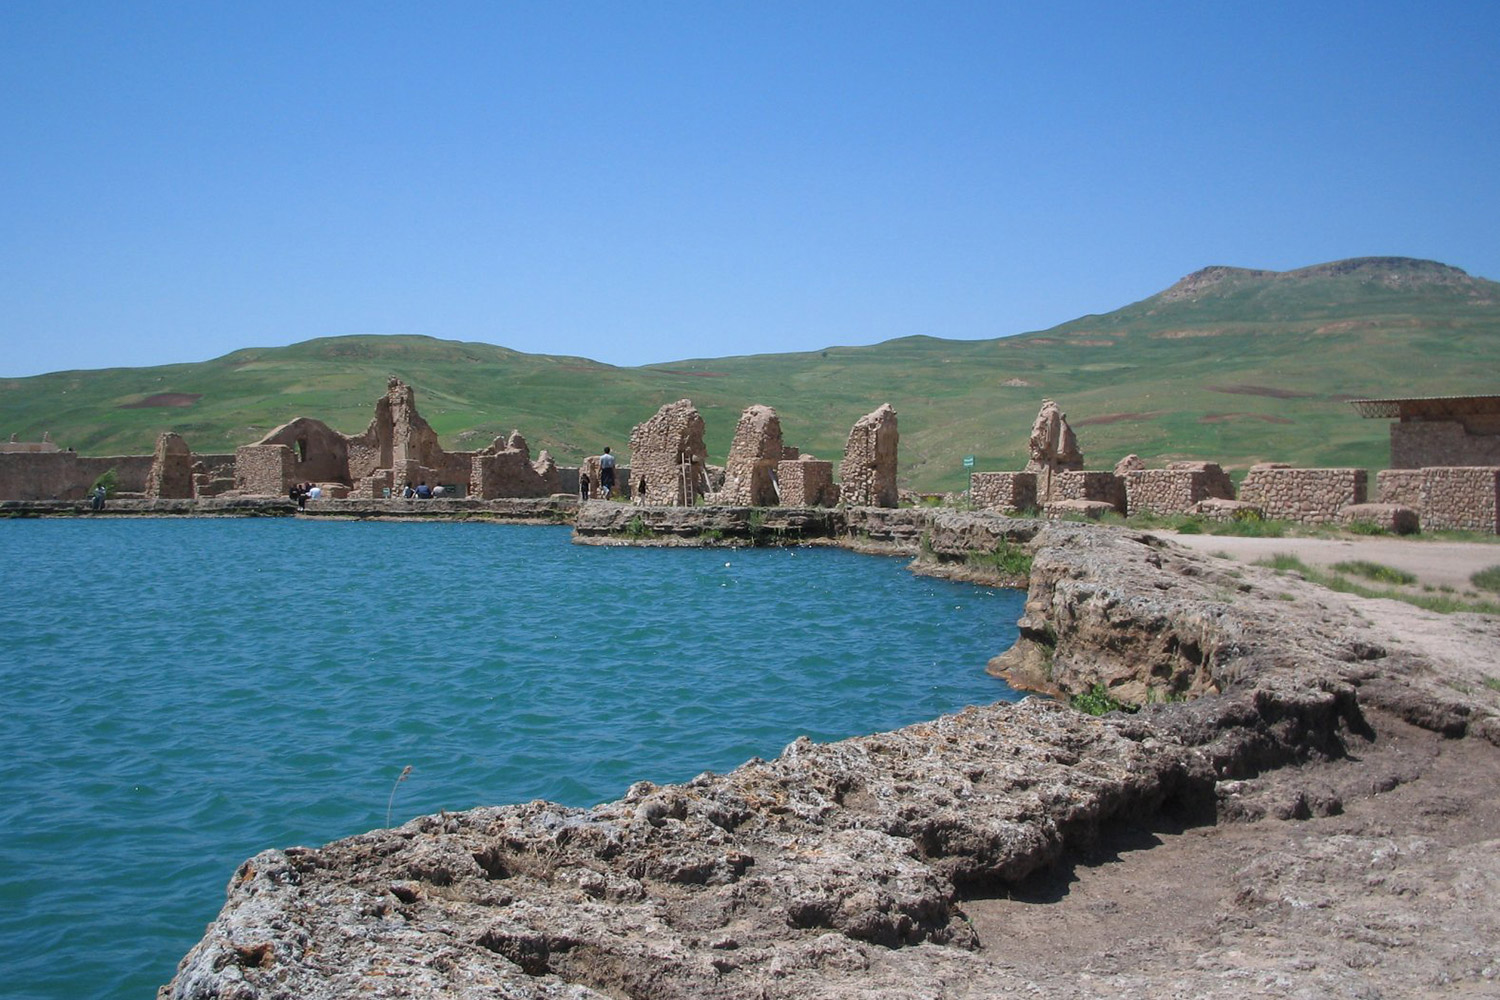 Takht-e Suleiman: A Captivating Remnant of Ancient Persia